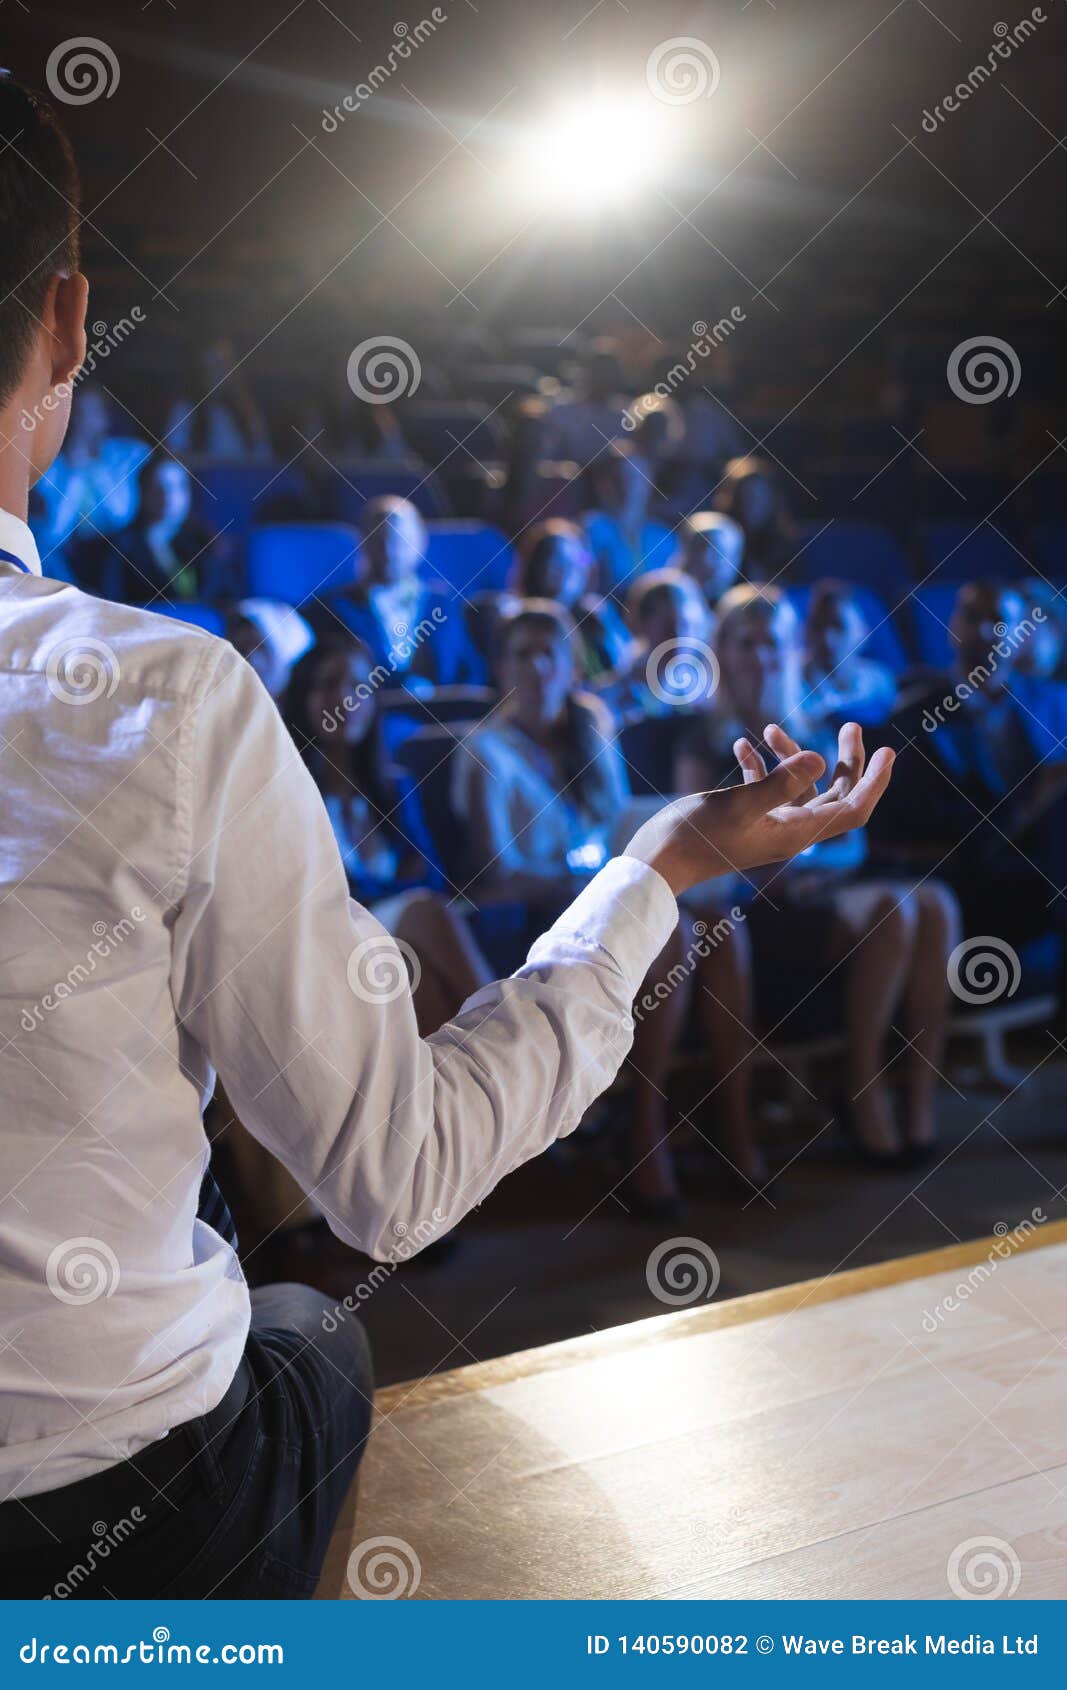 Businessman Giving Presentation In Front Of Audience In Auditorium